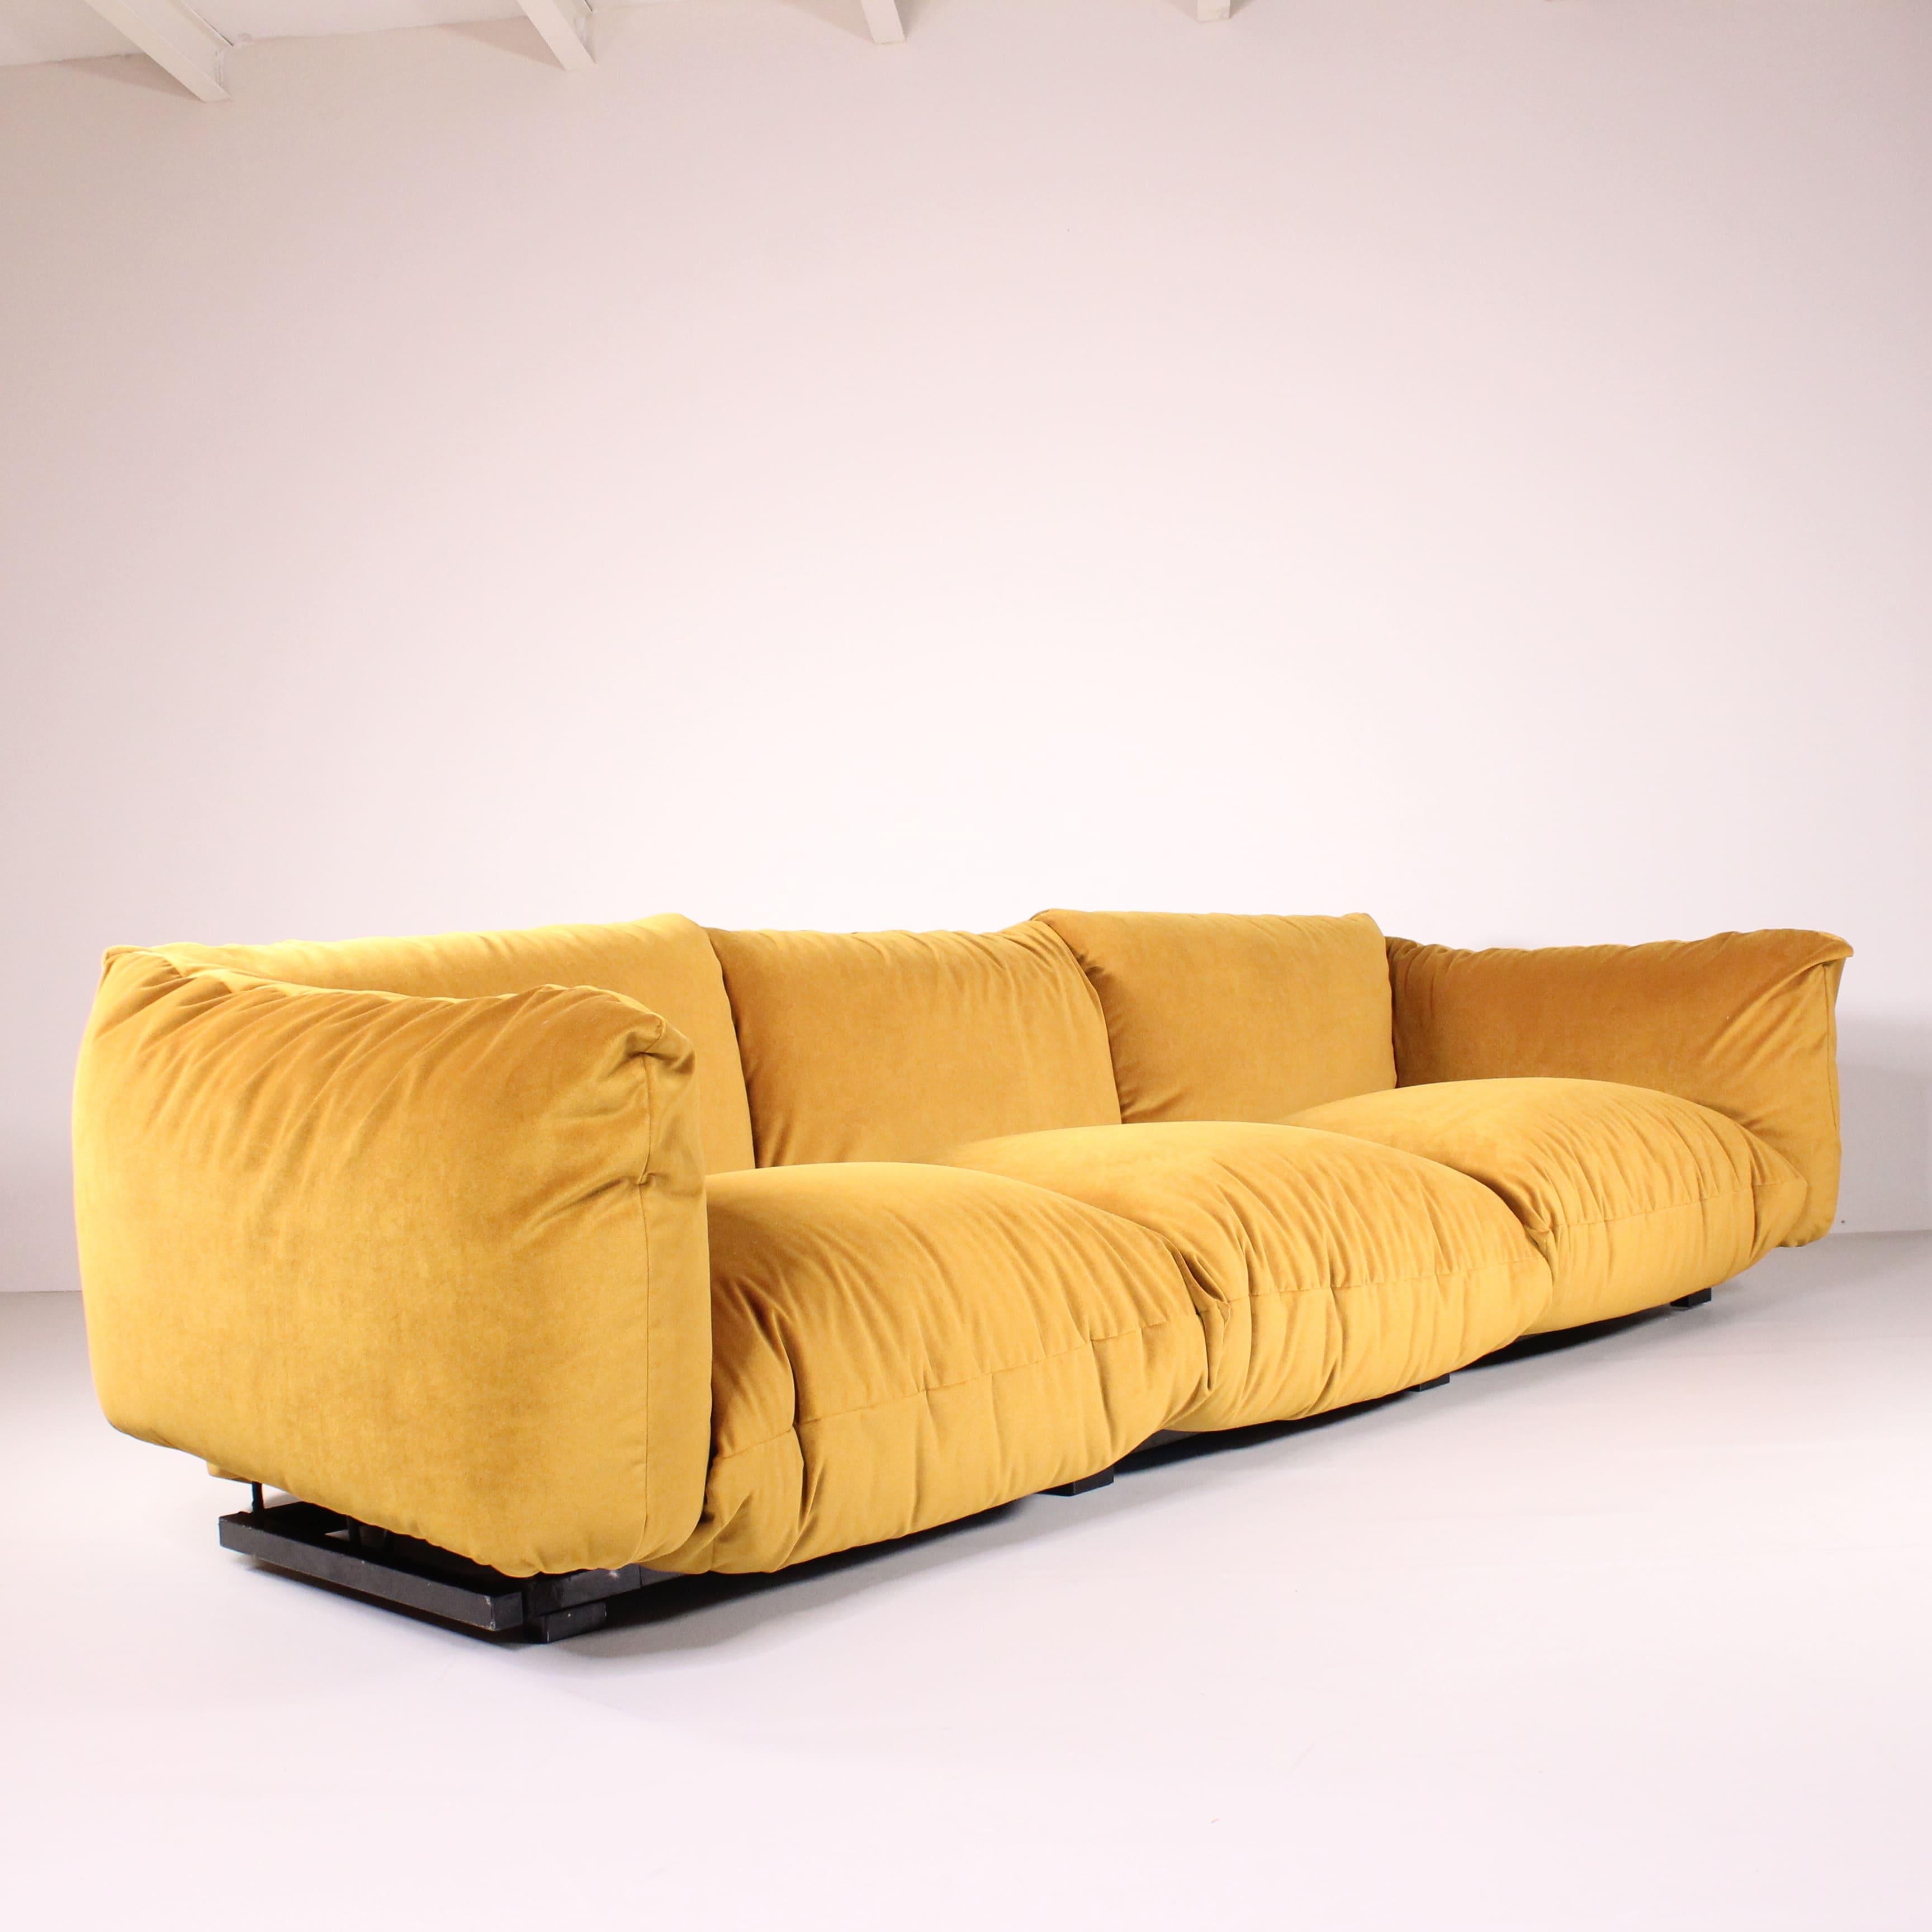 Marenco sofa and 2 armchairs set, Mario Marenco for Arflex, 1970 For Sale 3